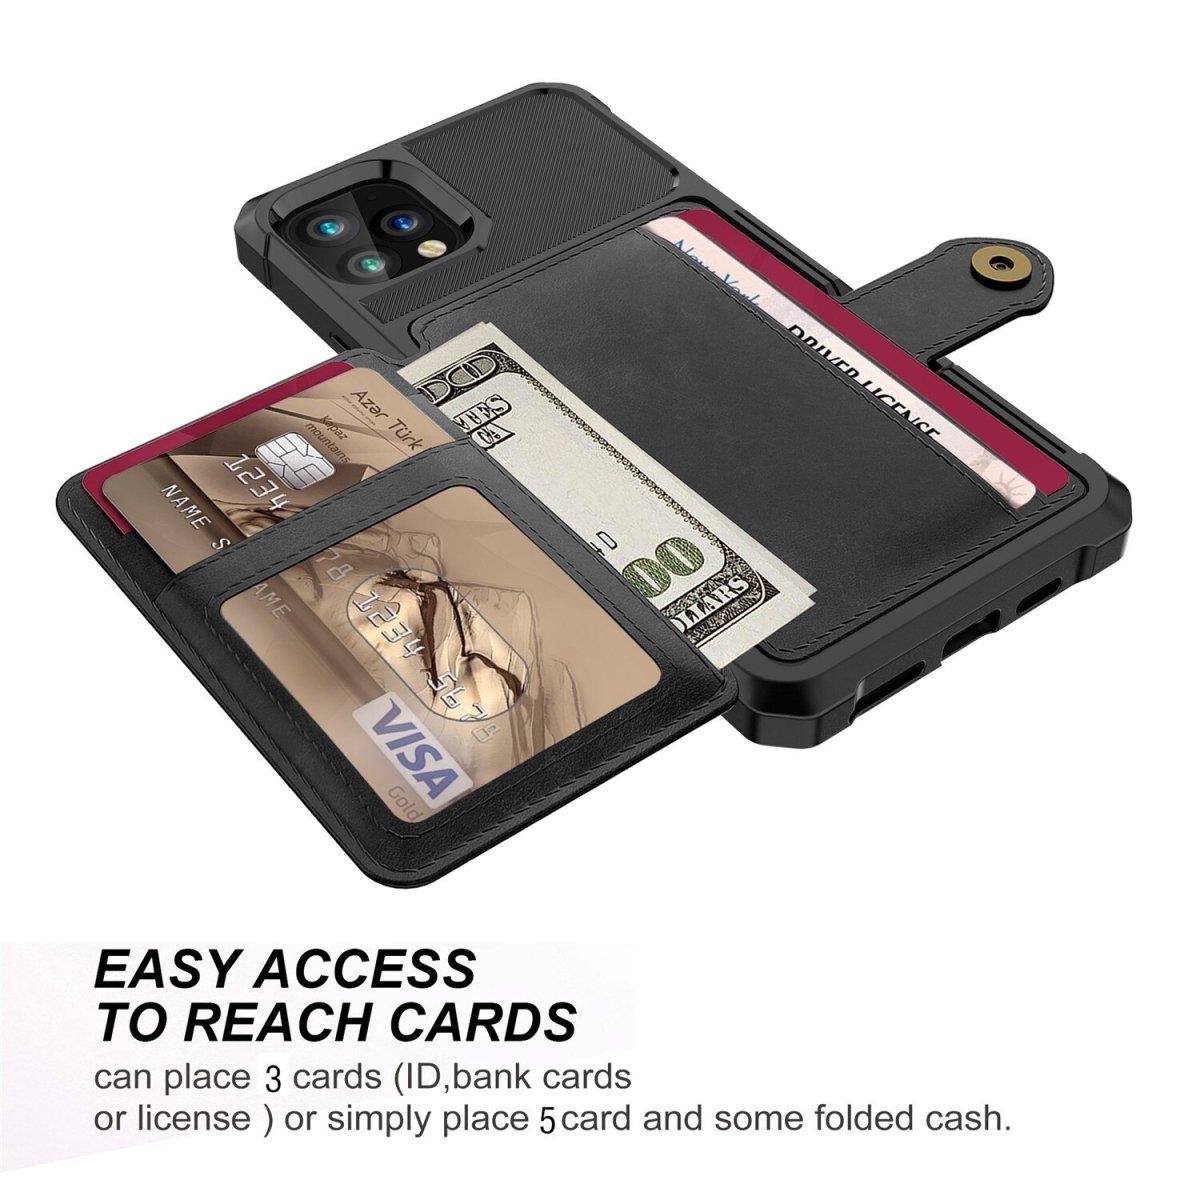 Echo Luxury Leather Wallet iPhone Case For 6, 7 & 8 Series